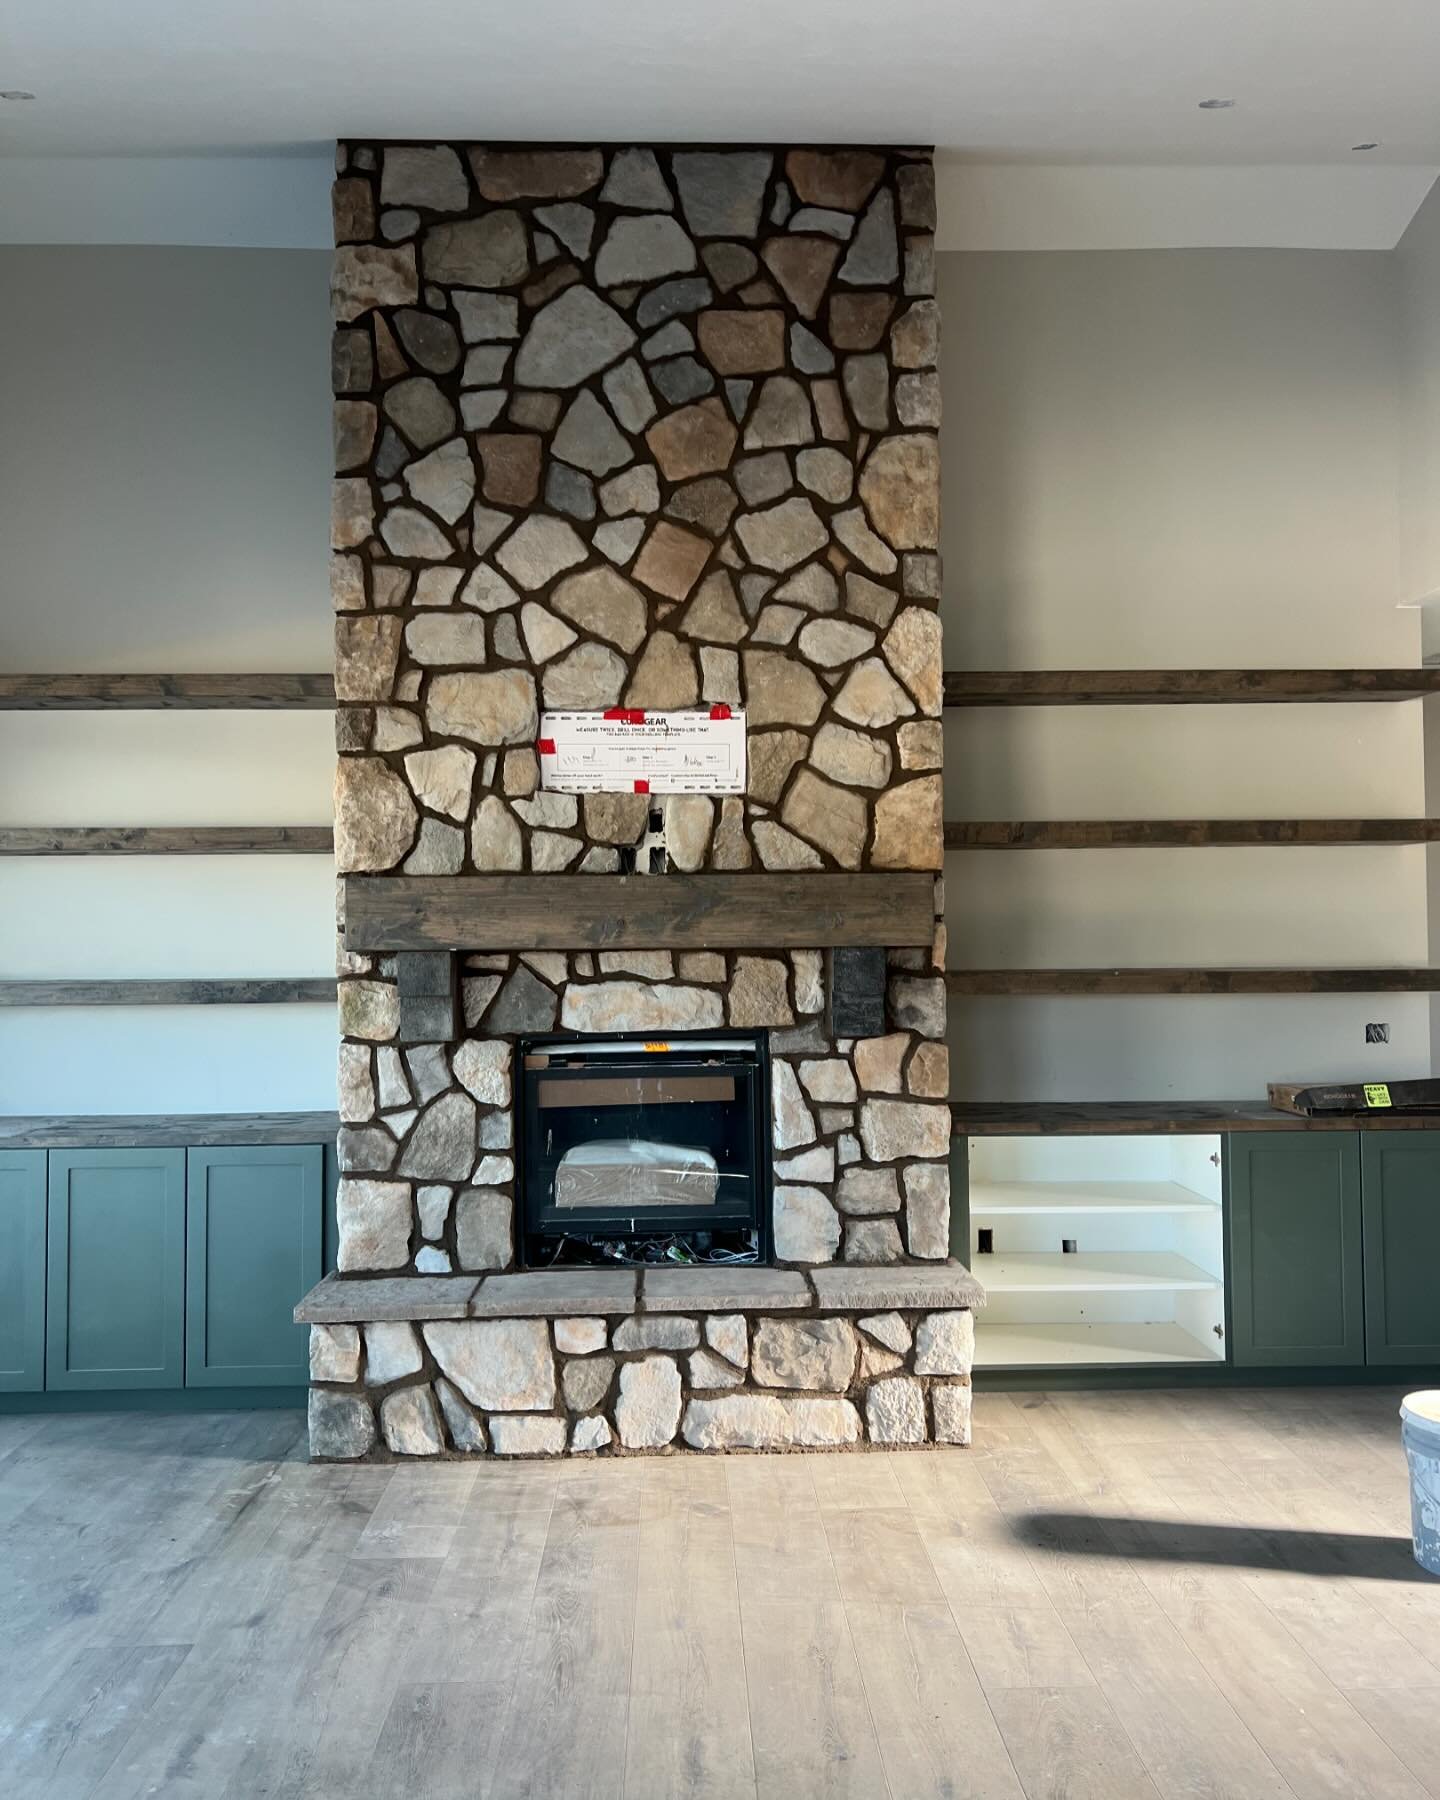 &ldquo;Check out our latest project! 🔥 We recently completed a stunning stone installation on a 13 ft high fireplace, elegantly adorned with floating shelves on the sides. The rich combination of brown hues creates a truly captivating aesthetic. ✨ #